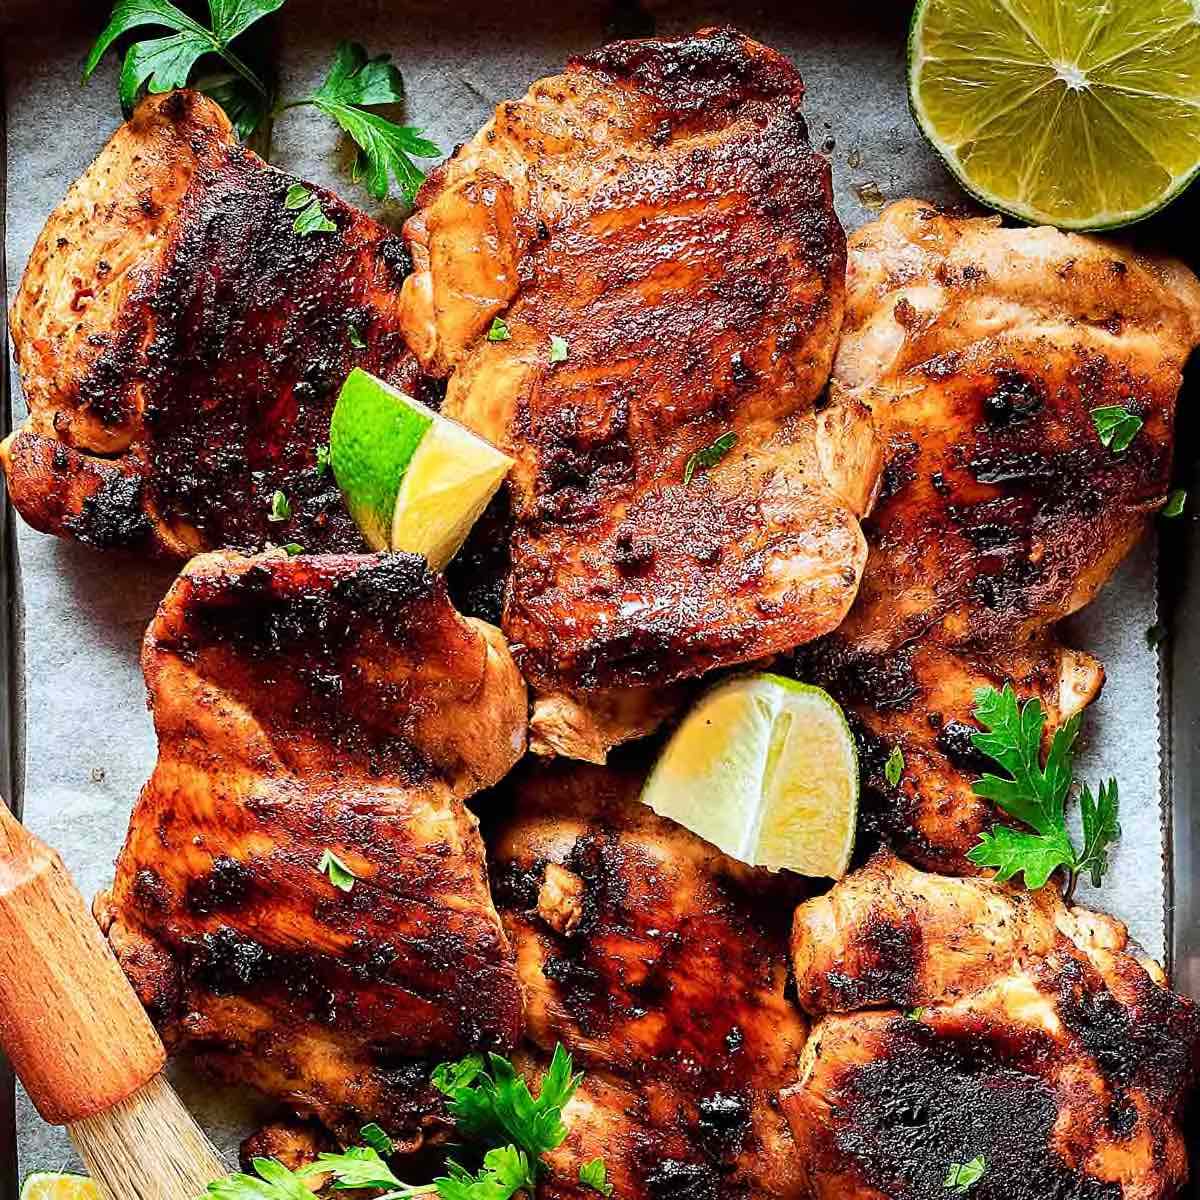 Grilled Boneless Skinless Chicken Thighs - The Culinary Compass